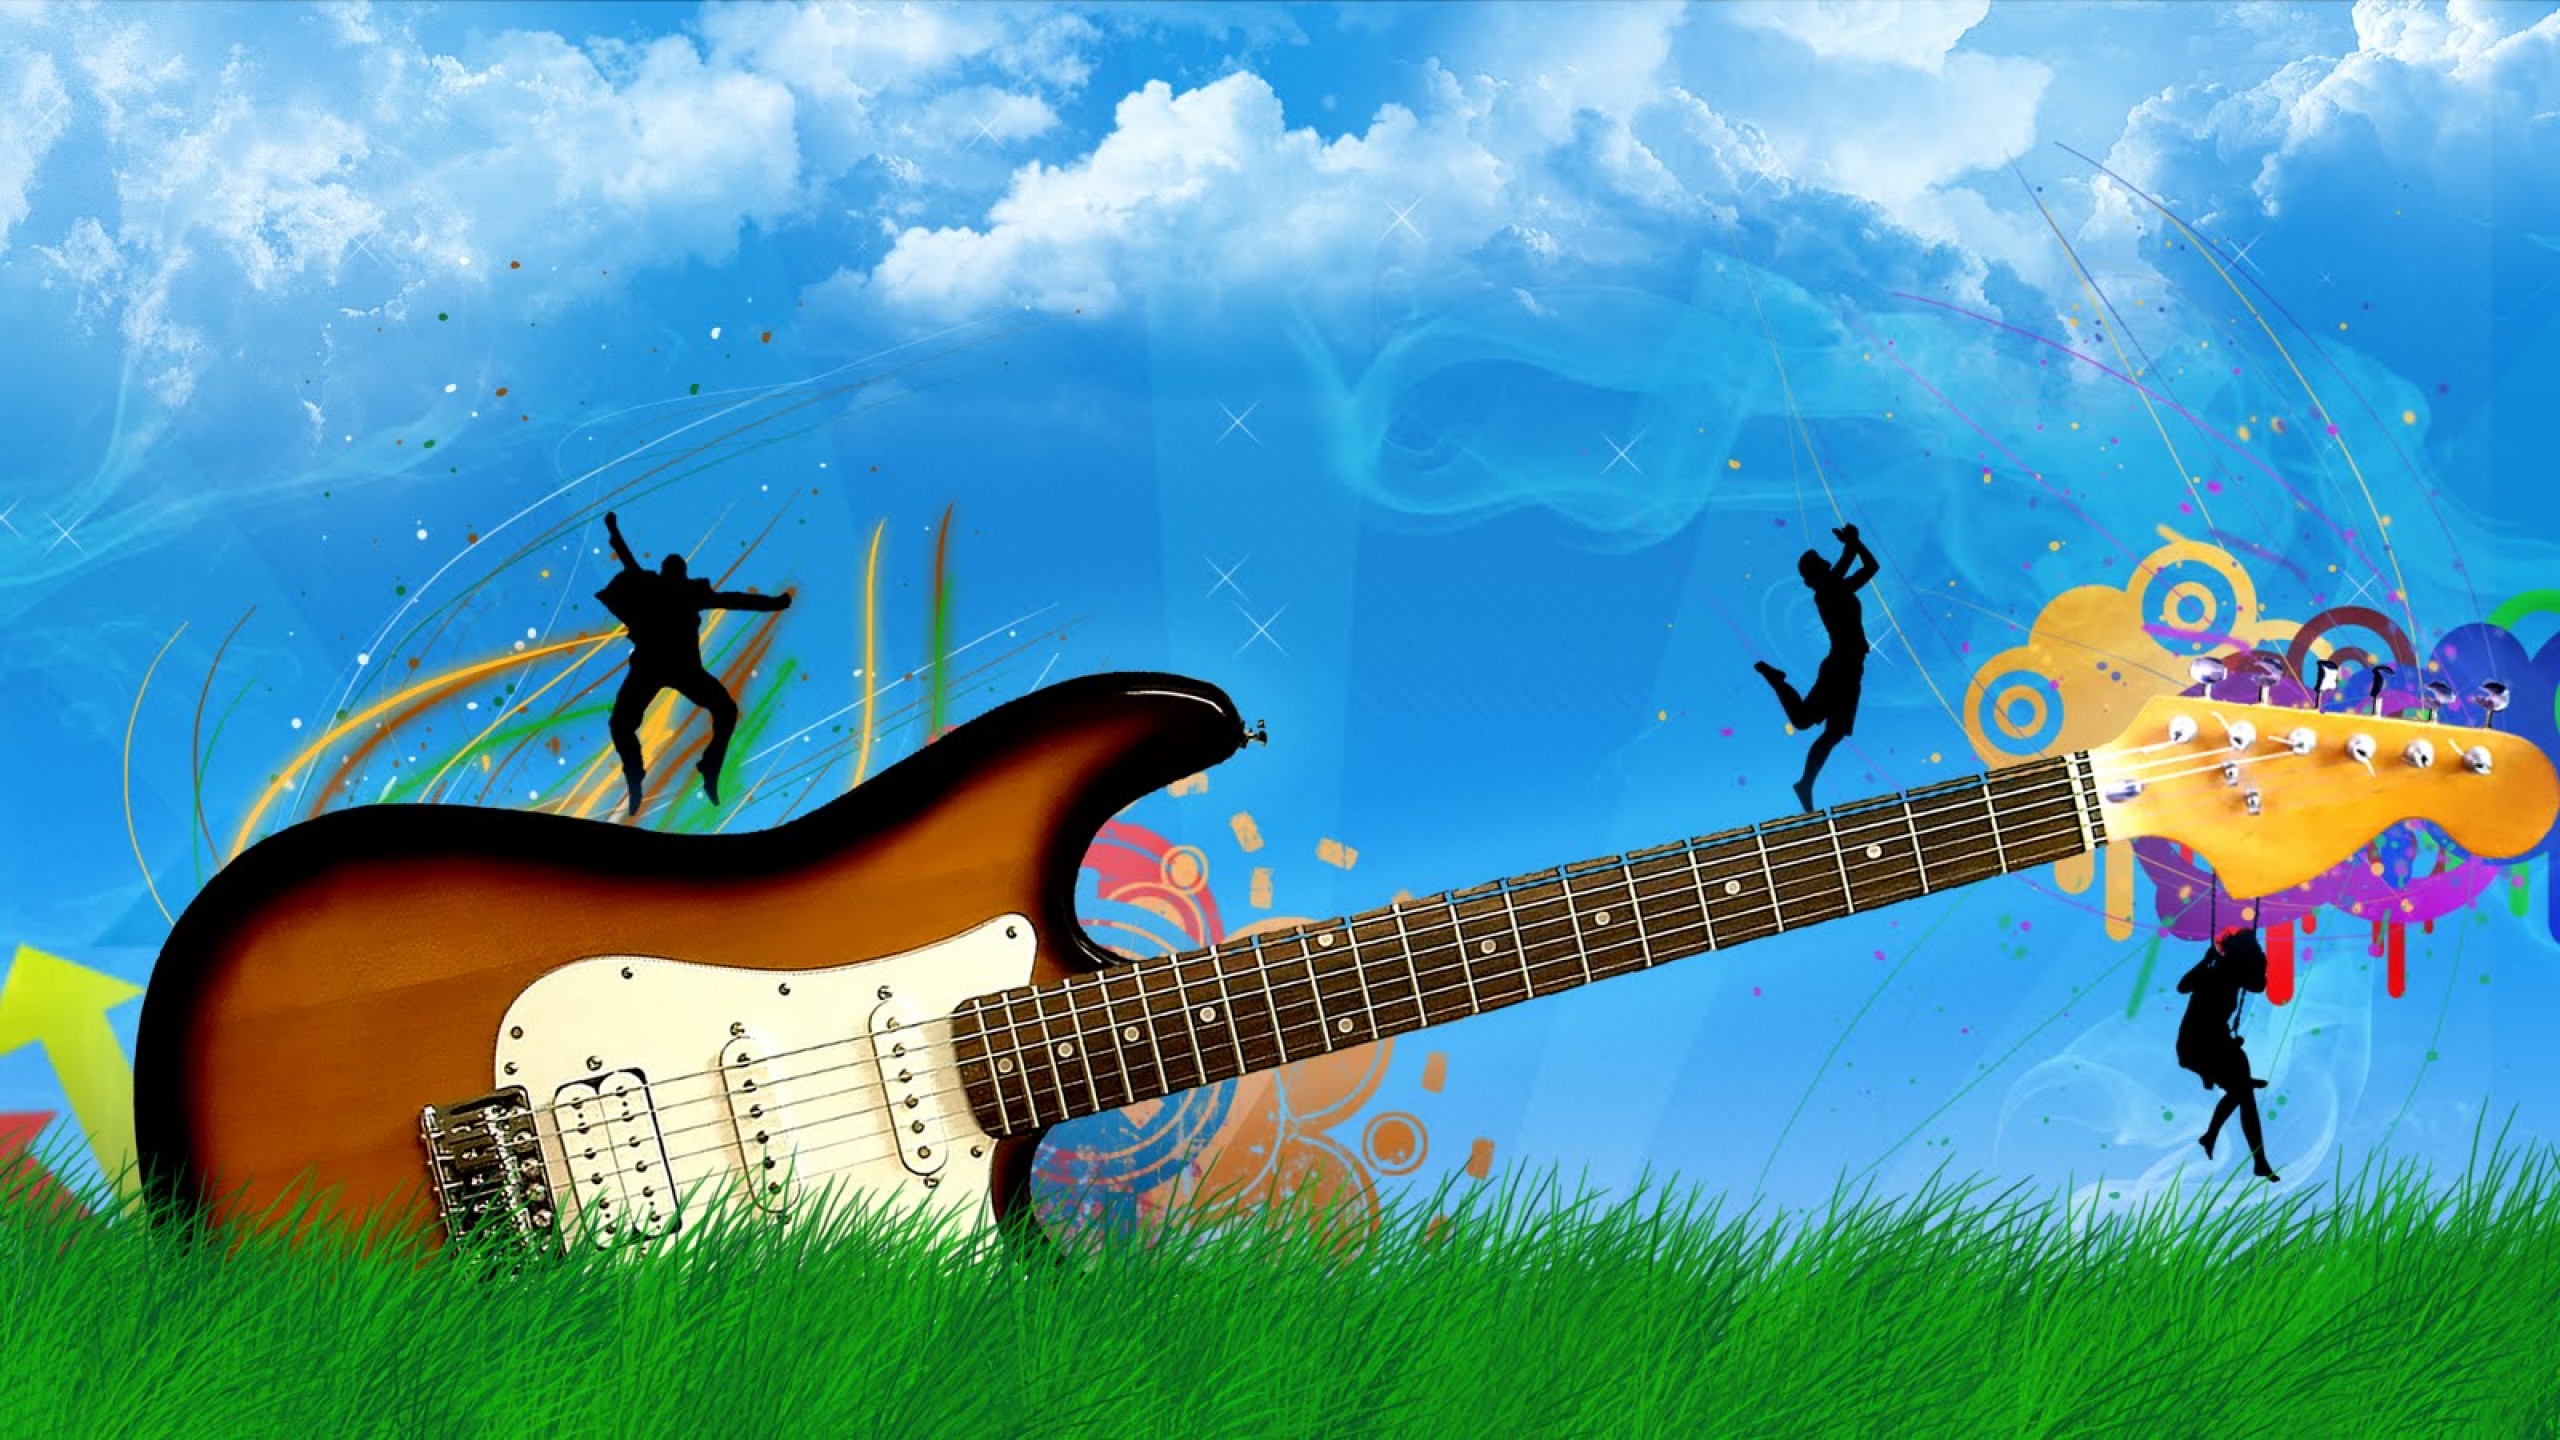 Guitar Art Wallpaper for Desktop and Mobiles Youtube Cover Photo - HD ...